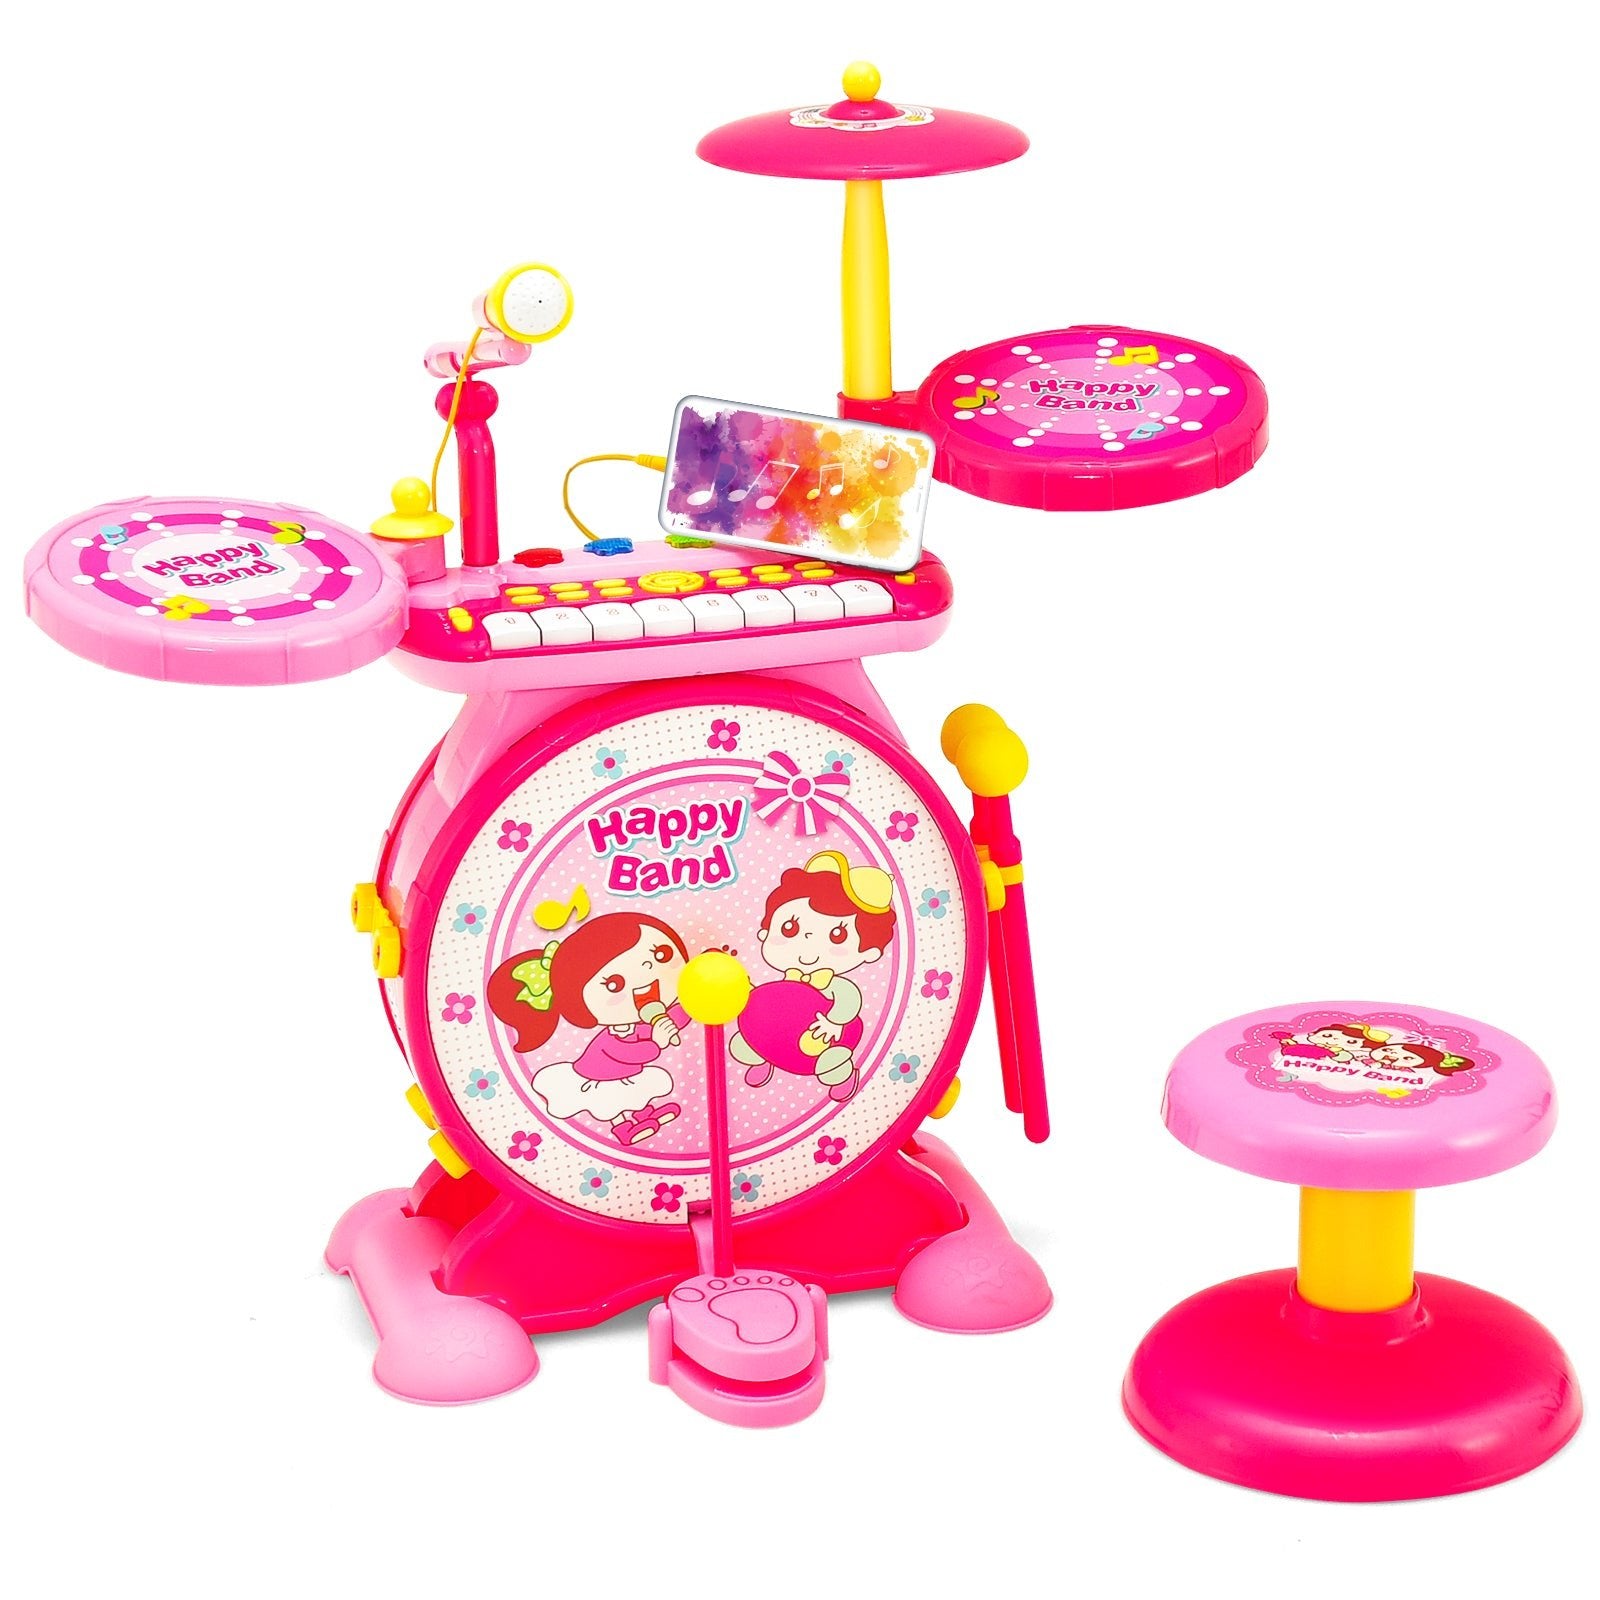 2-in-1 Kids Electronic Drum Kit Toy - Pink with Keyboard & Microphone